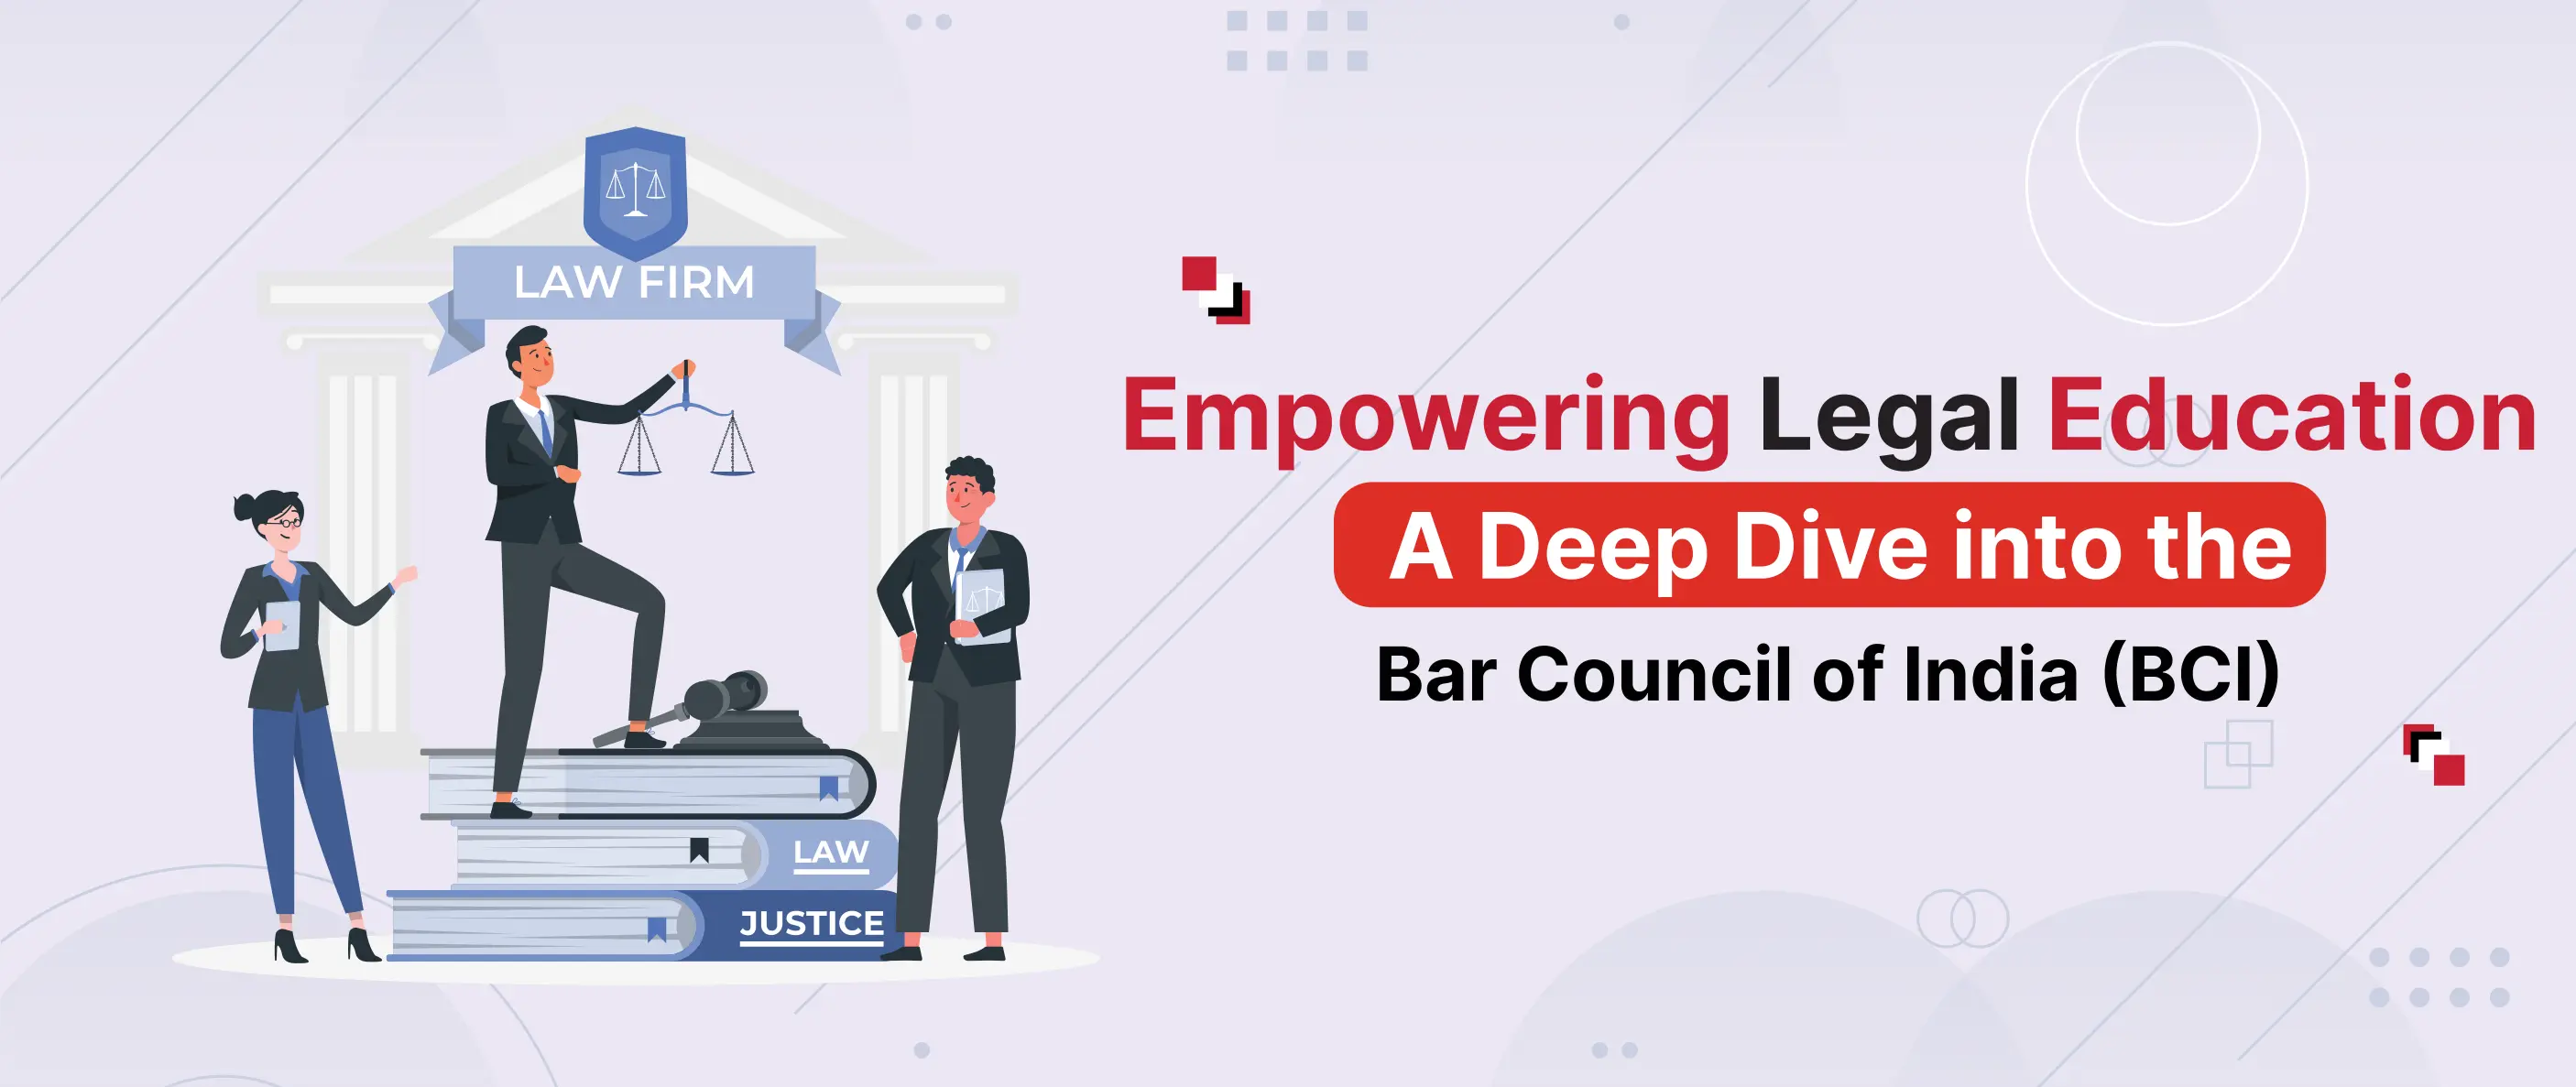 Empowering Legal Education: A Deep Dive into the Bar Council of India (BCI)